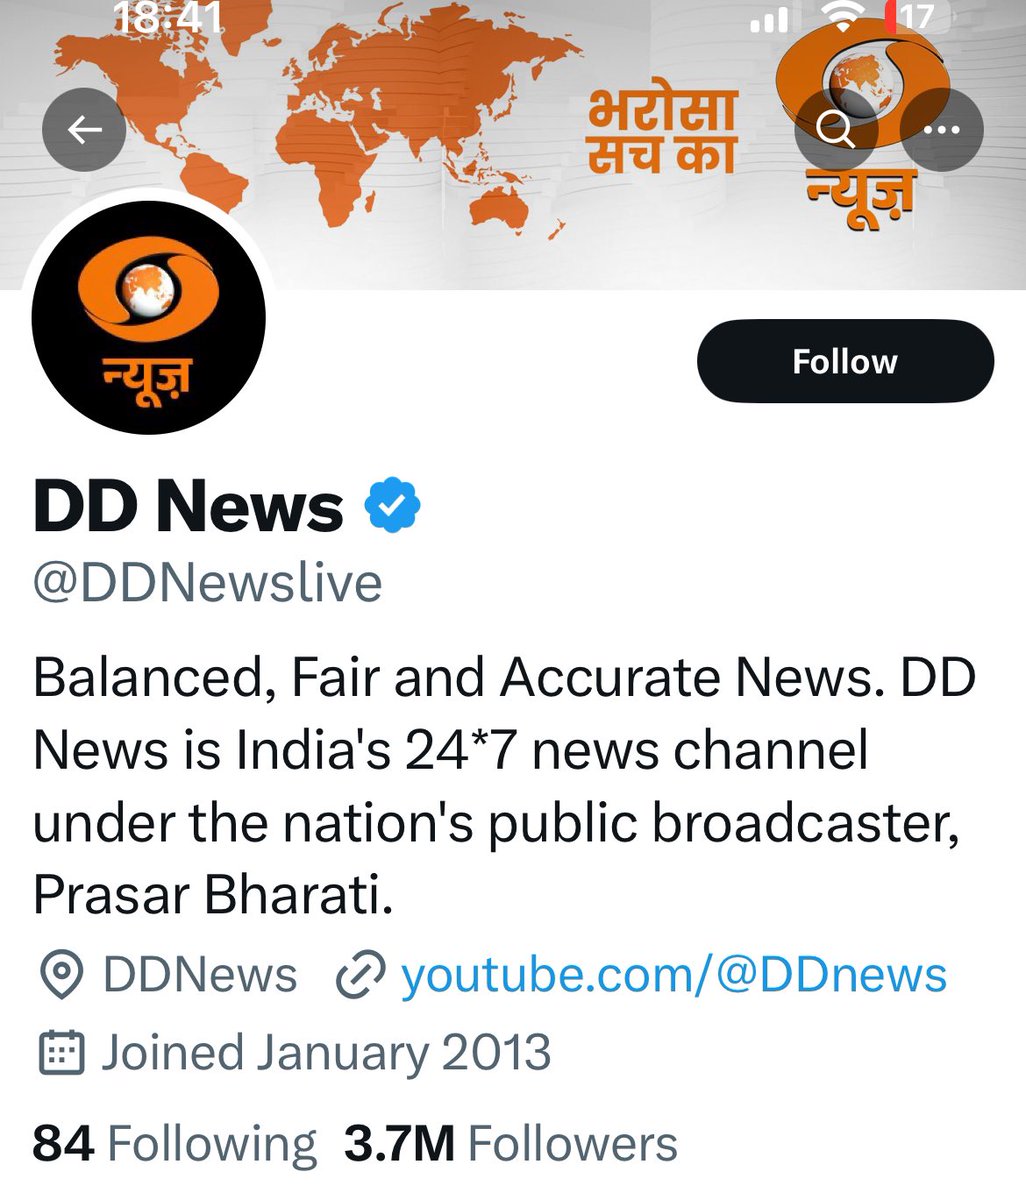 DD News has changed its logo from red to saffron